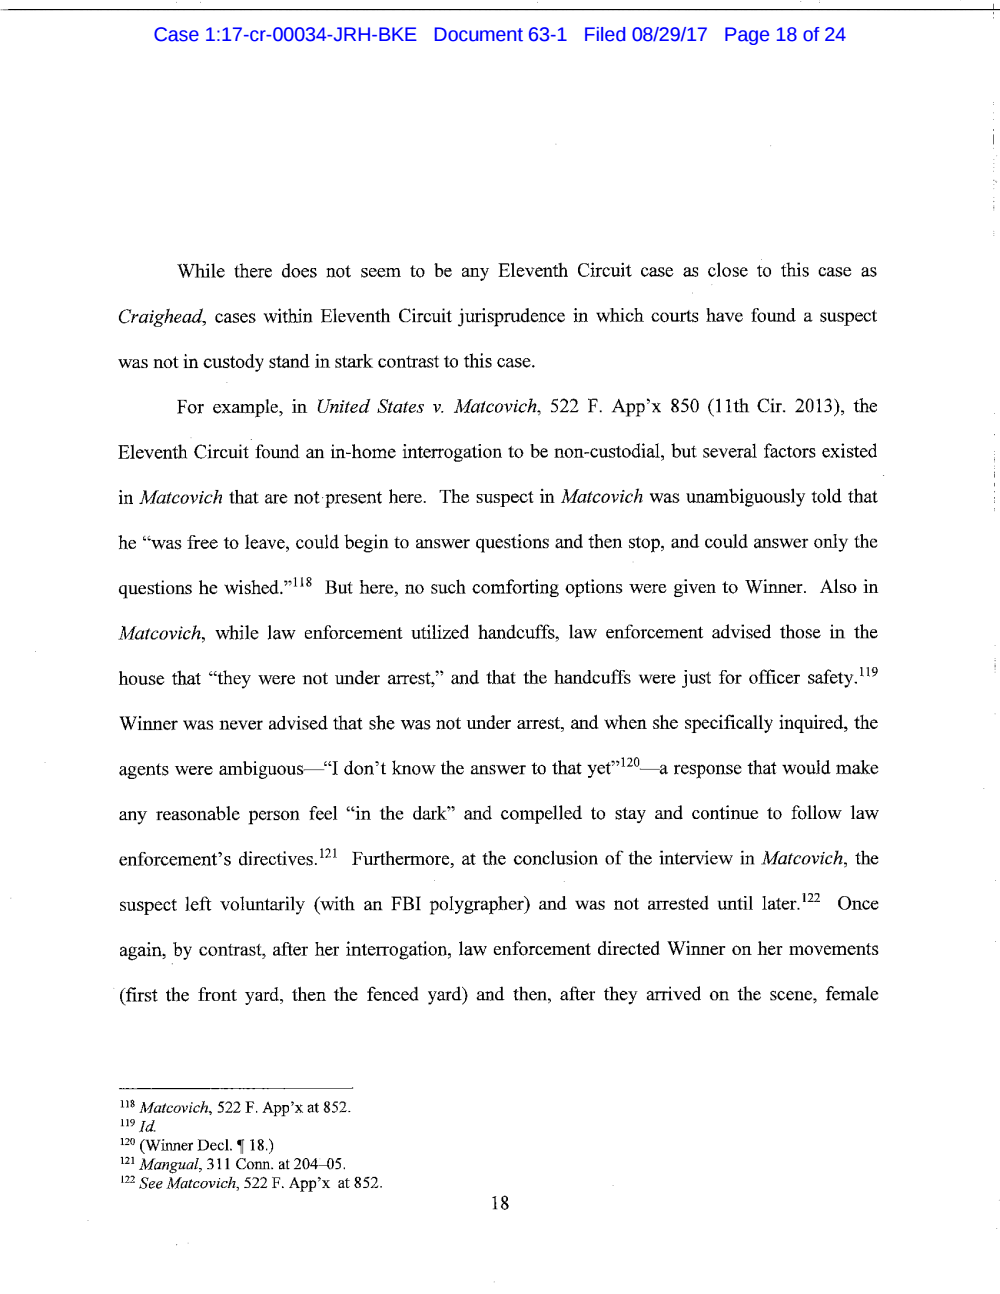 Page 18 from Reality Winner Memo in Support of Motion to Suppress